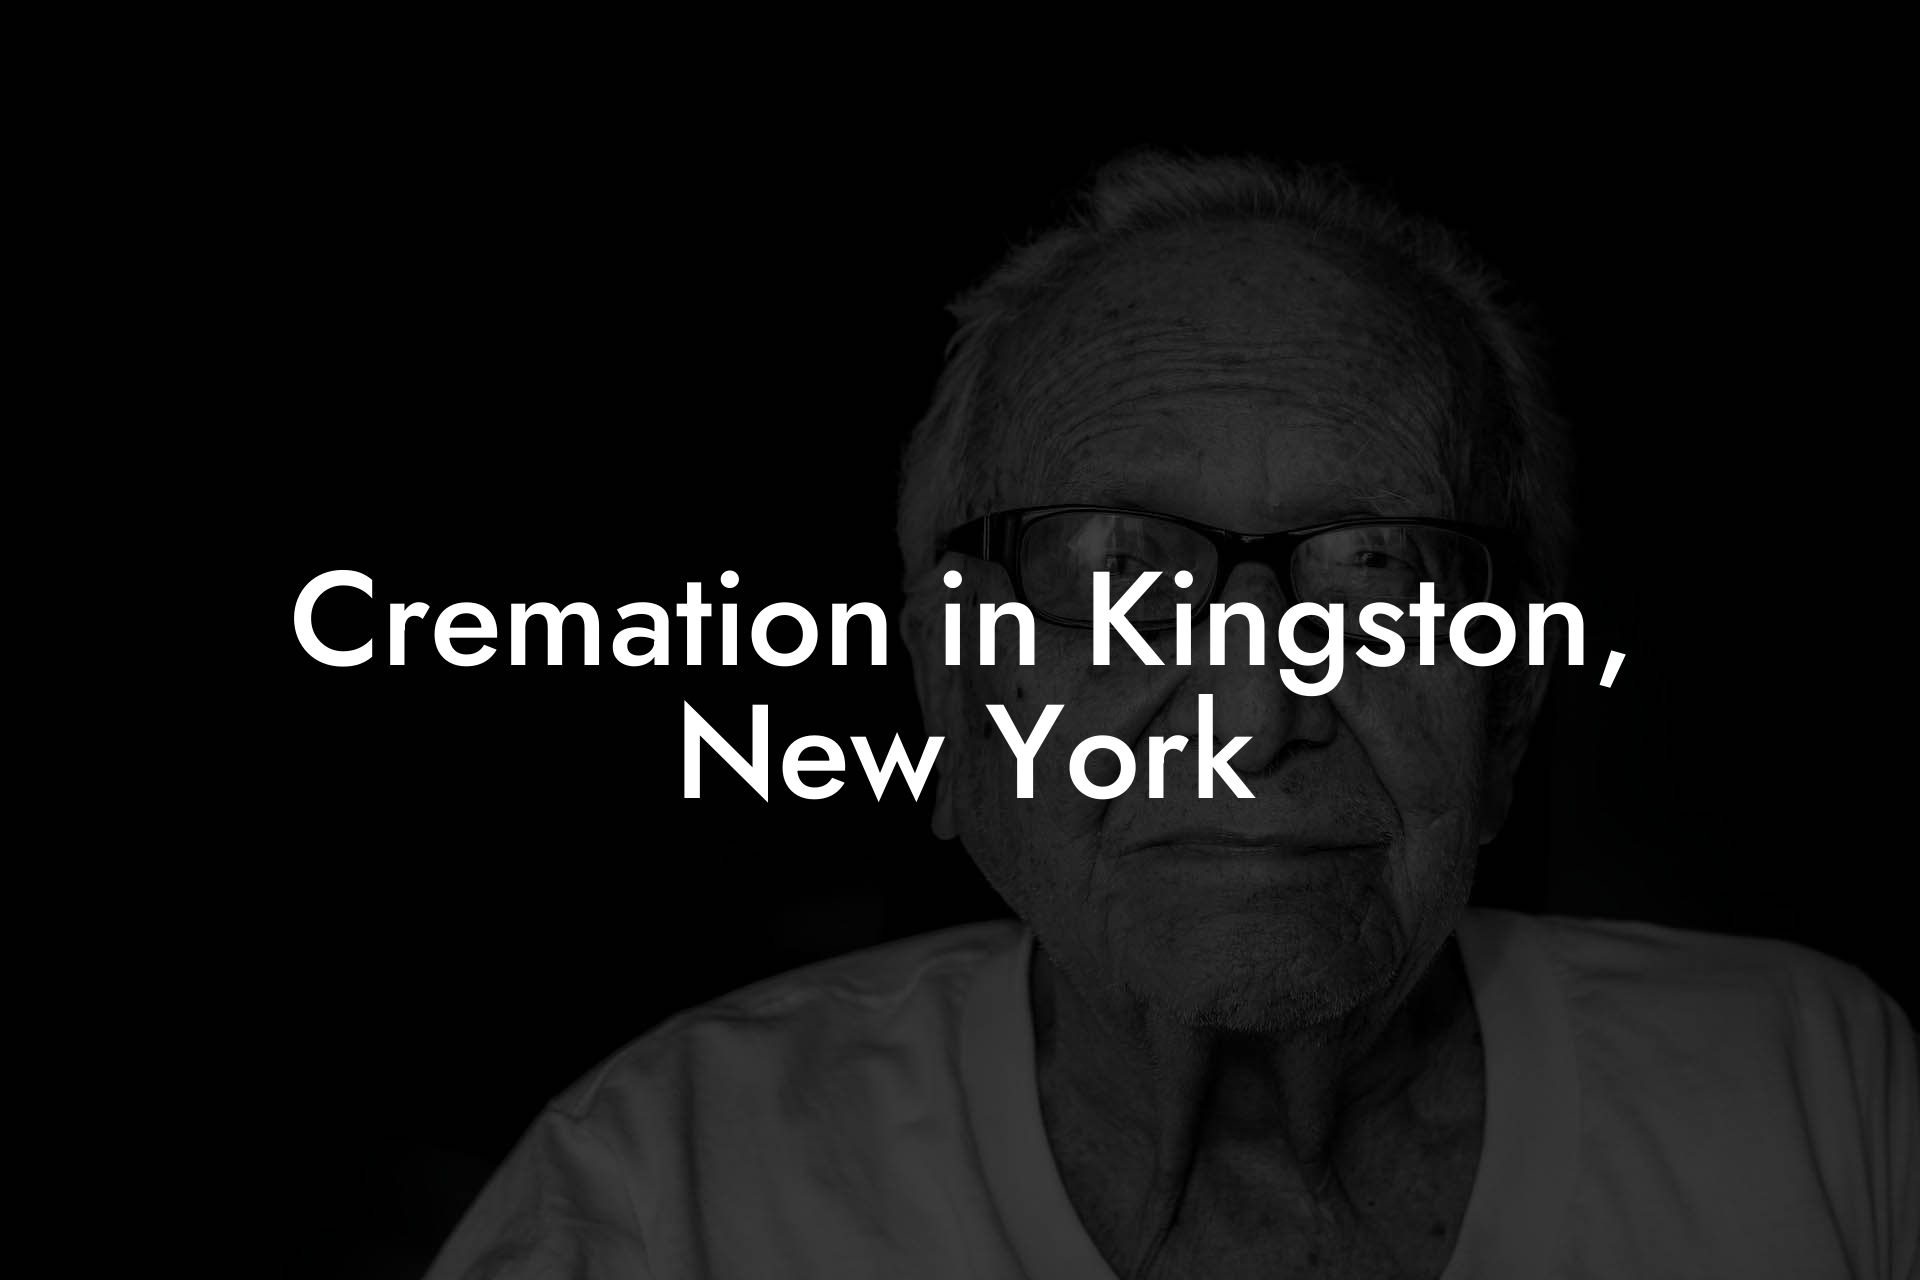 Cremation in Kingston, New York